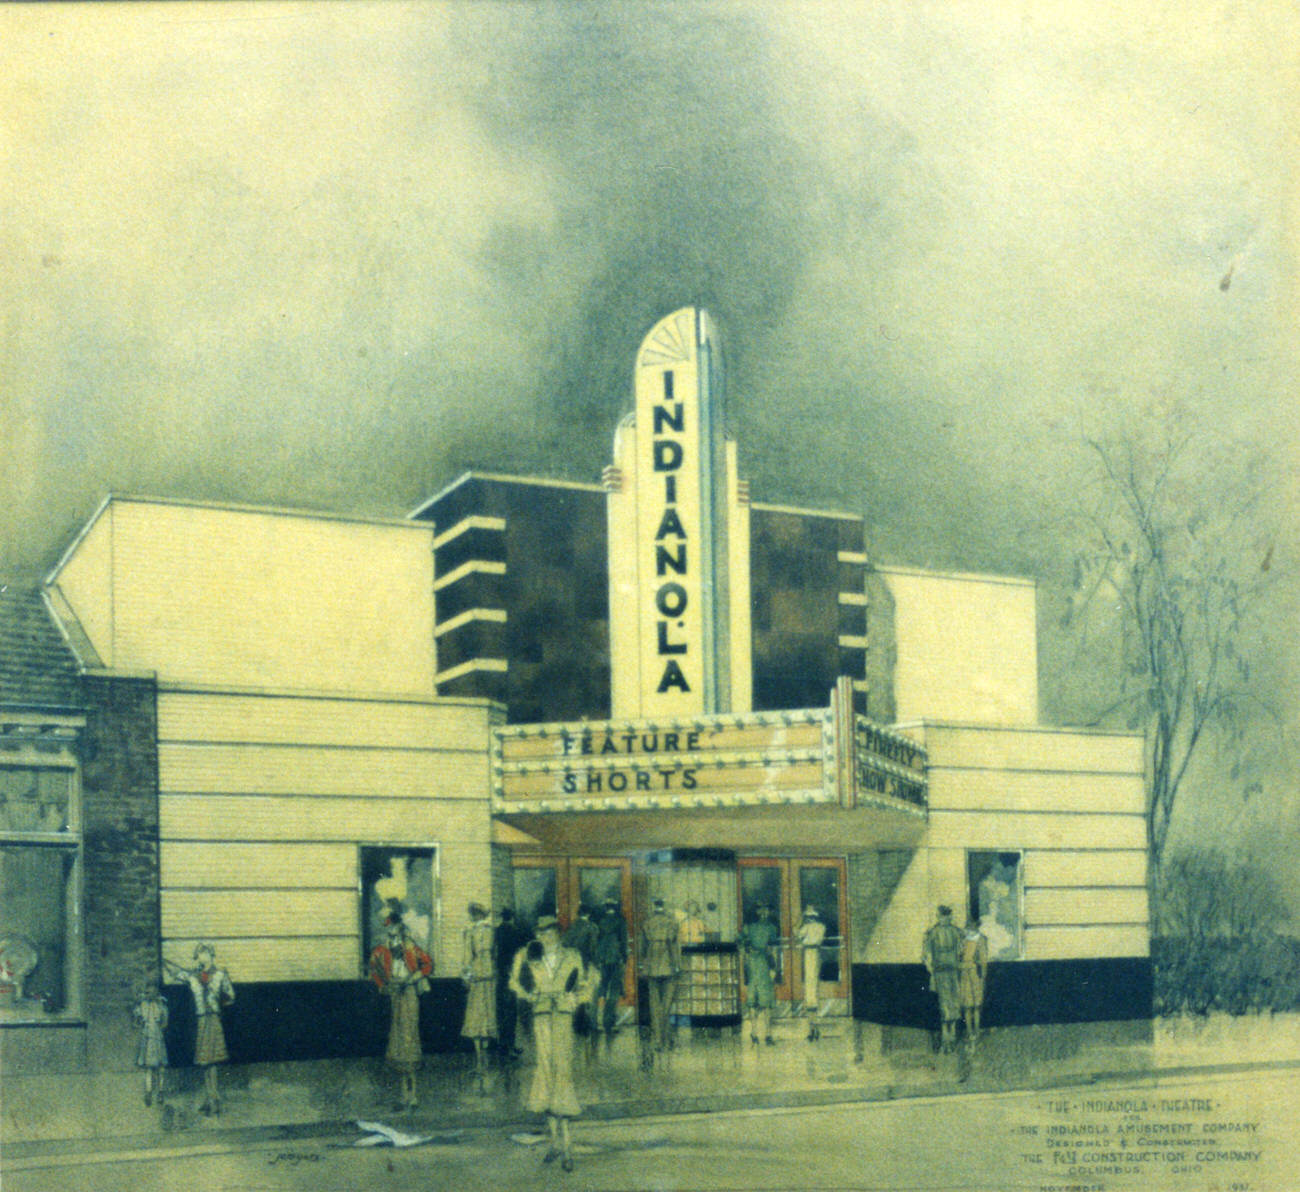 Indianola Theater, opened February 17, 1938, Clintonville, 1939.